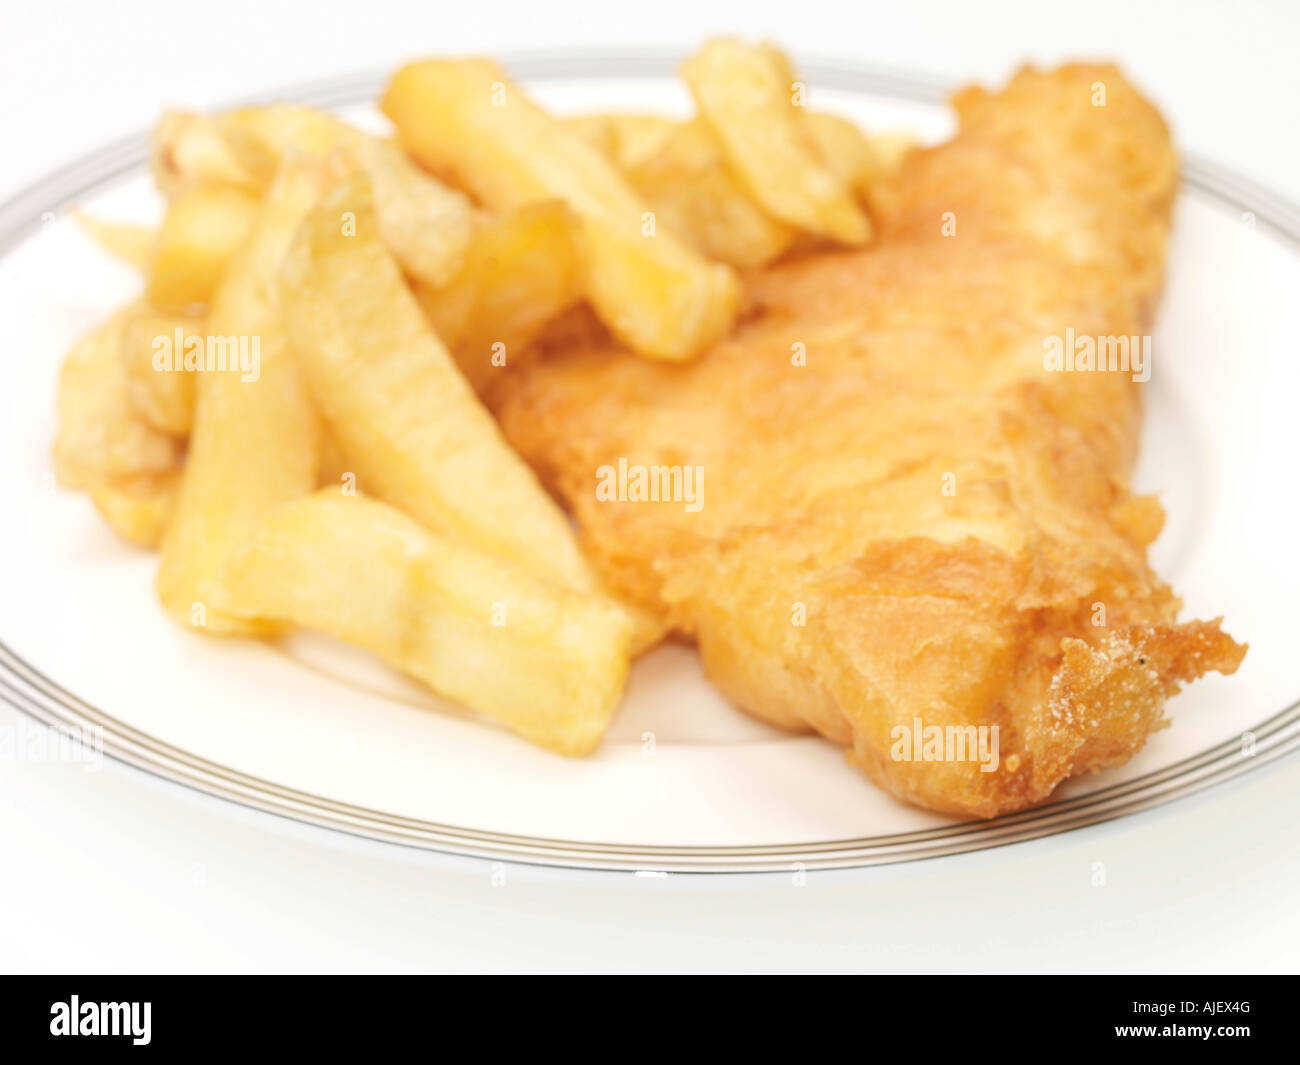 Plate Of Shop Bought Takeaway Cod or Haddock Fish and Chips Against A White Background with A Clipping Path And No People Stock Photo